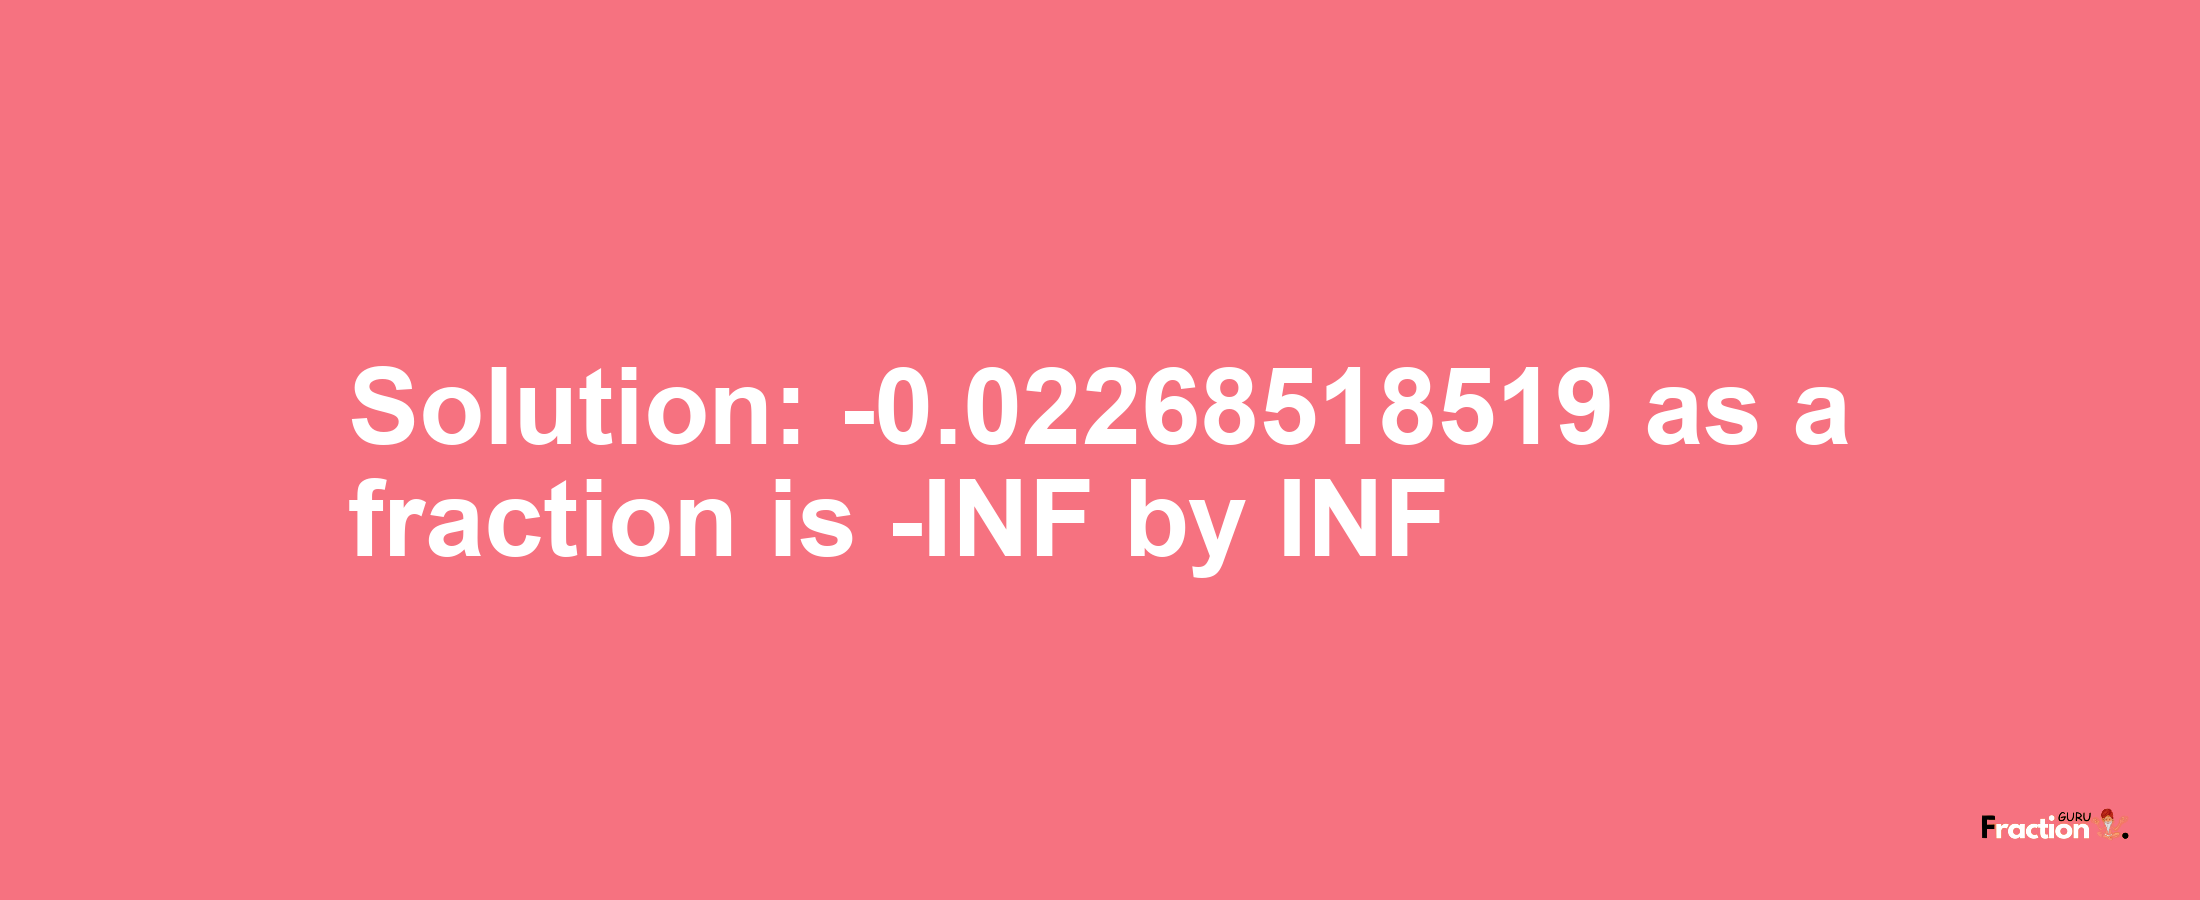 Solution:-0.02268518519 as a fraction is -INF/INF